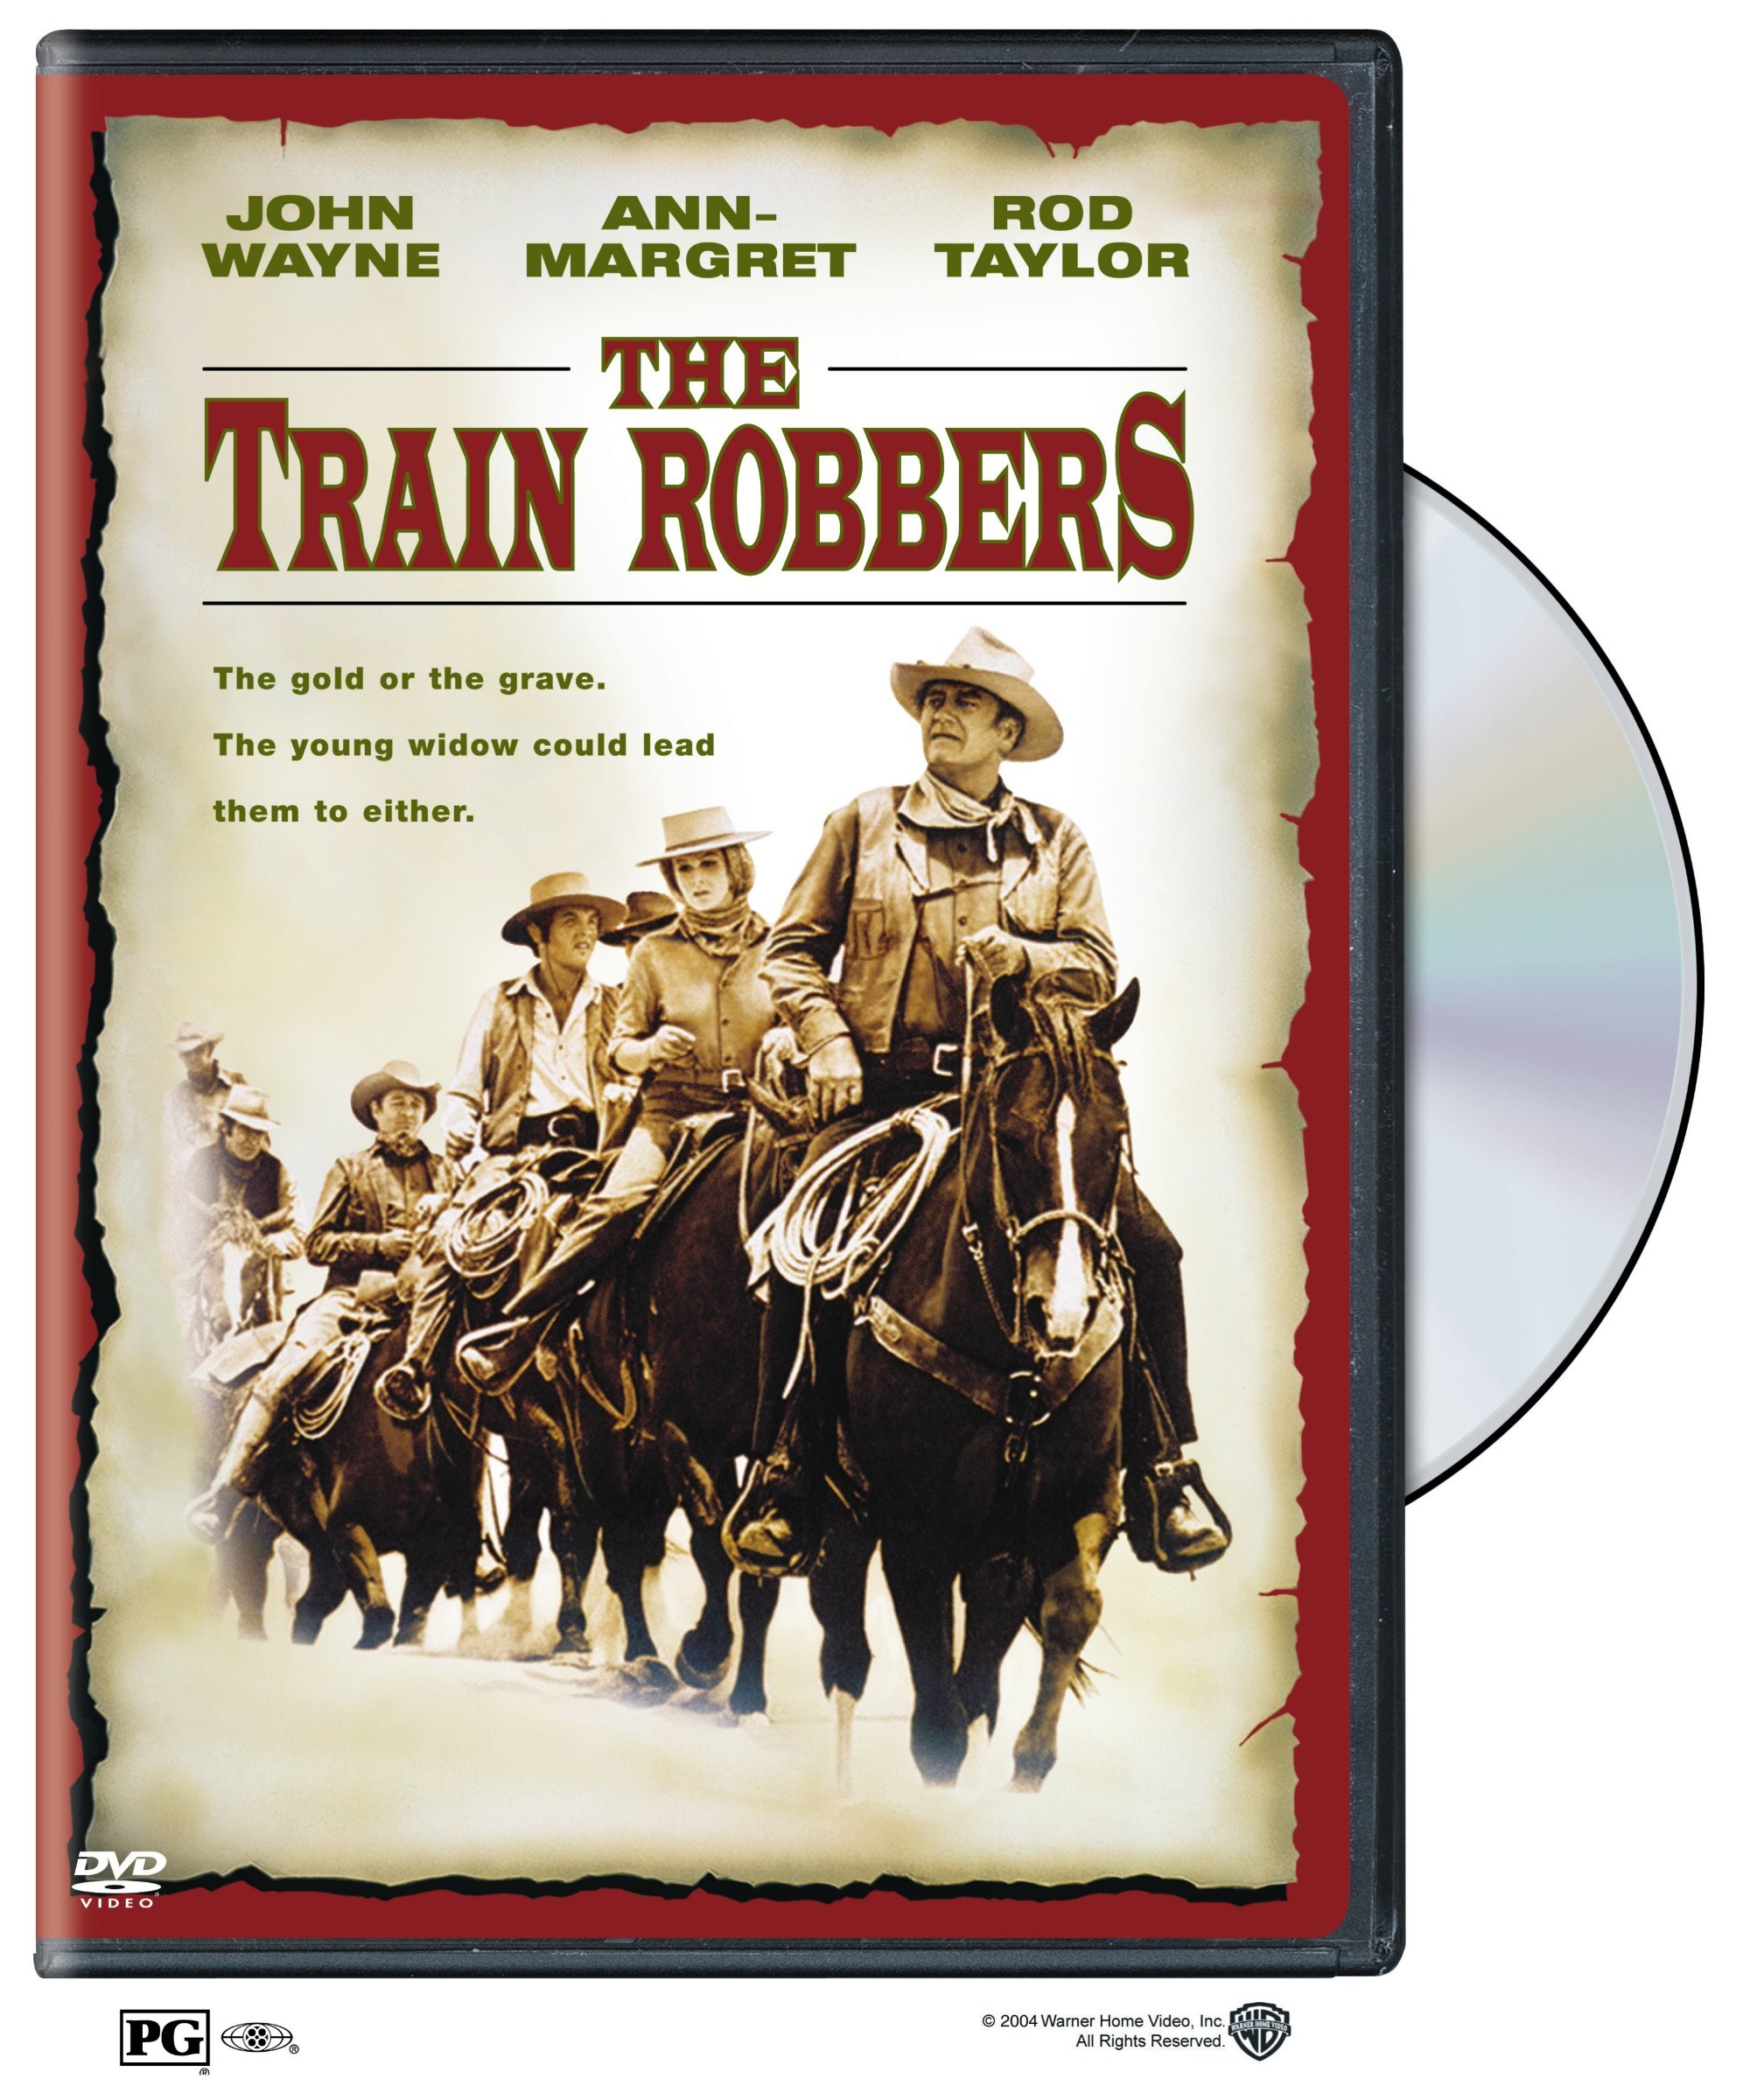 The Train Robbers (DVD Widescreen) - DVD [ 1973 ]  - Western Movies On DVD - Movies On GRUV